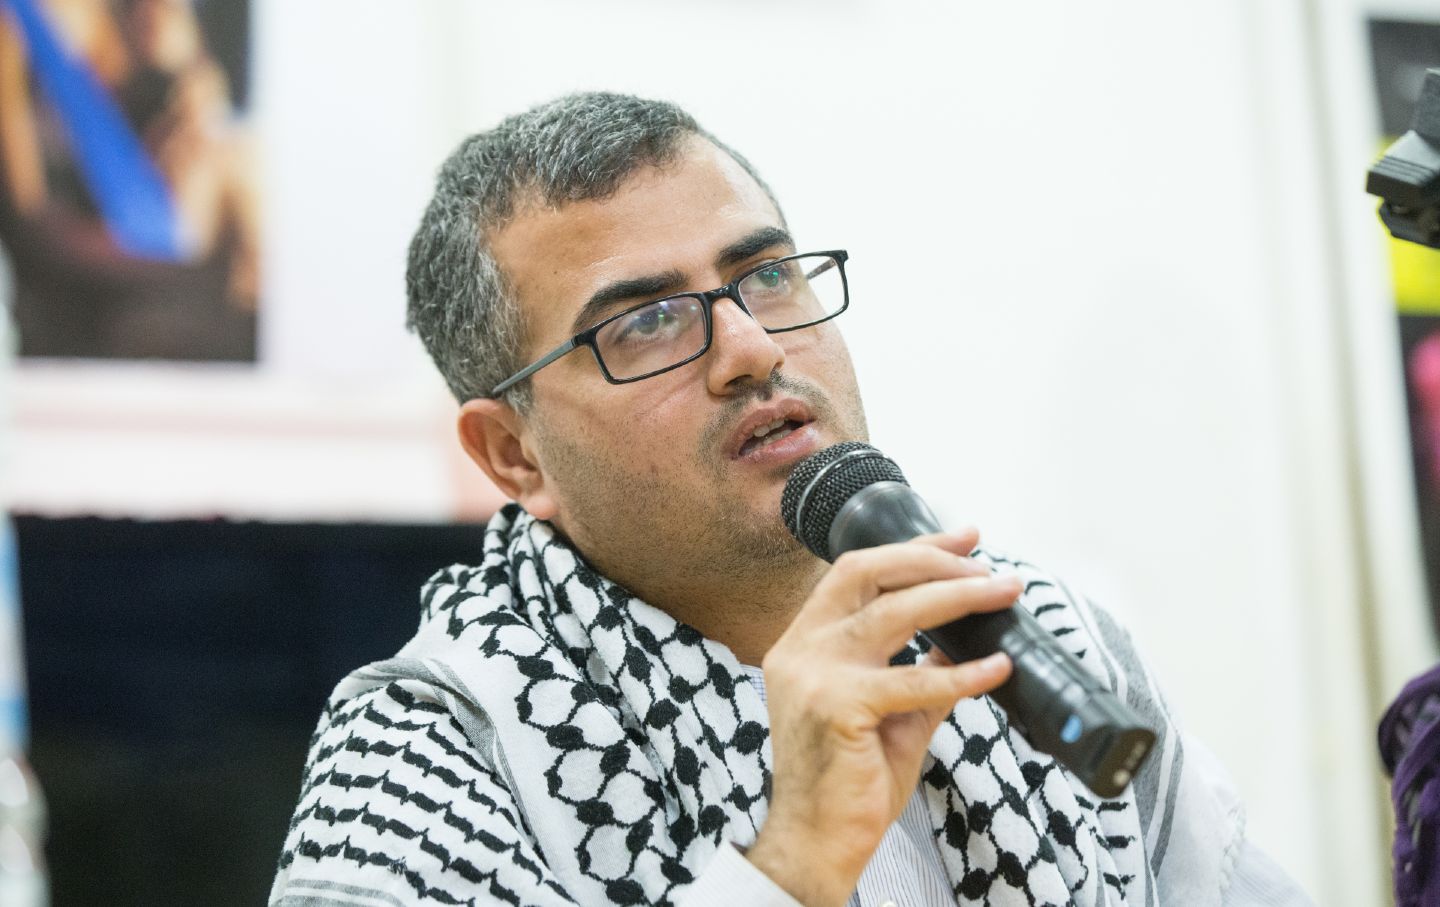 Palestinian journalist and activist Ahmed Abu Artema during a meeting in Rome in 2020.